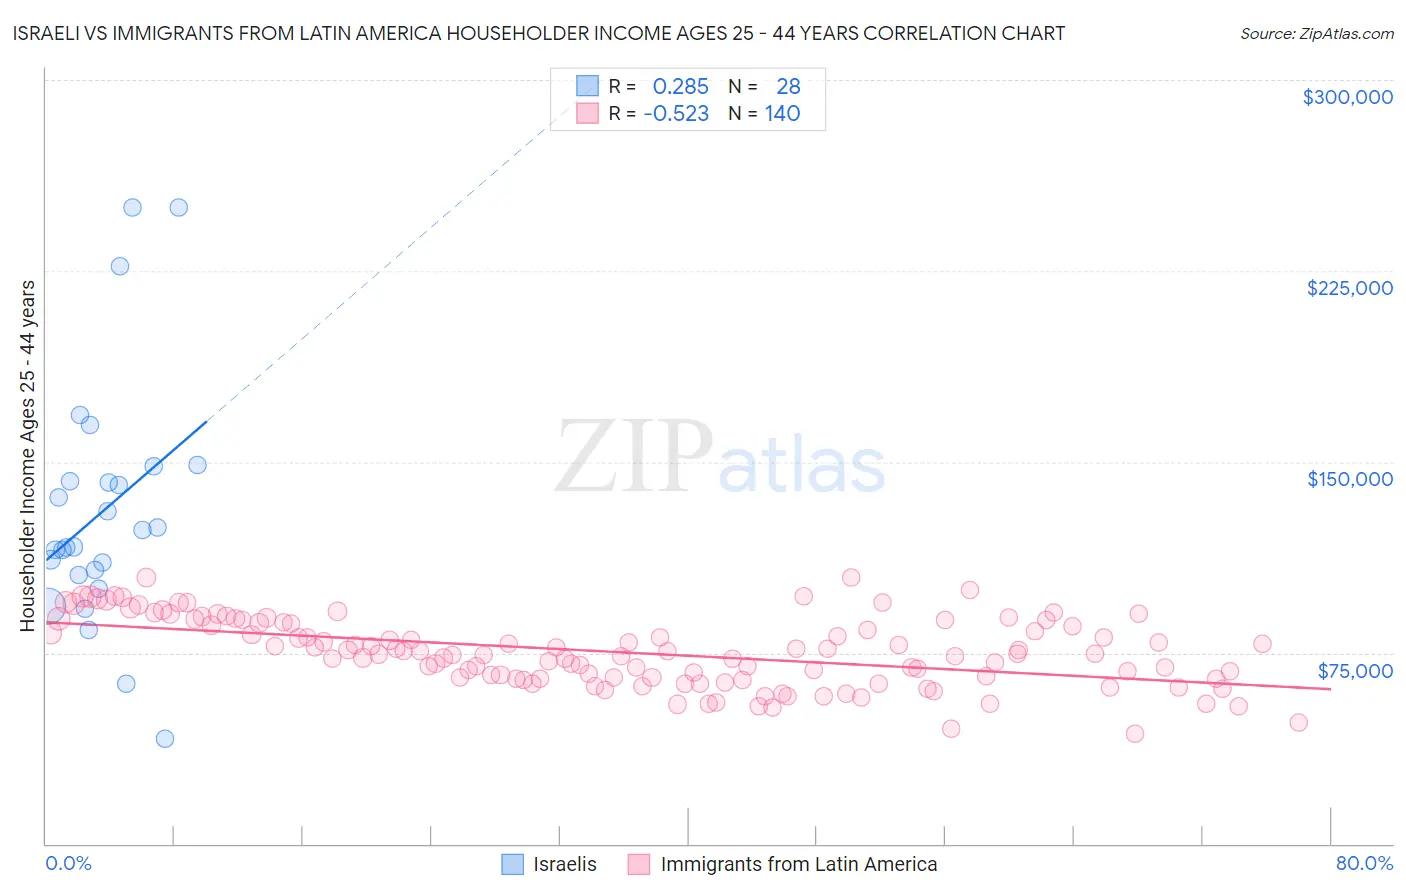 Israeli vs Immigrants from Latin America Householder Income Ages 25 - 44 years